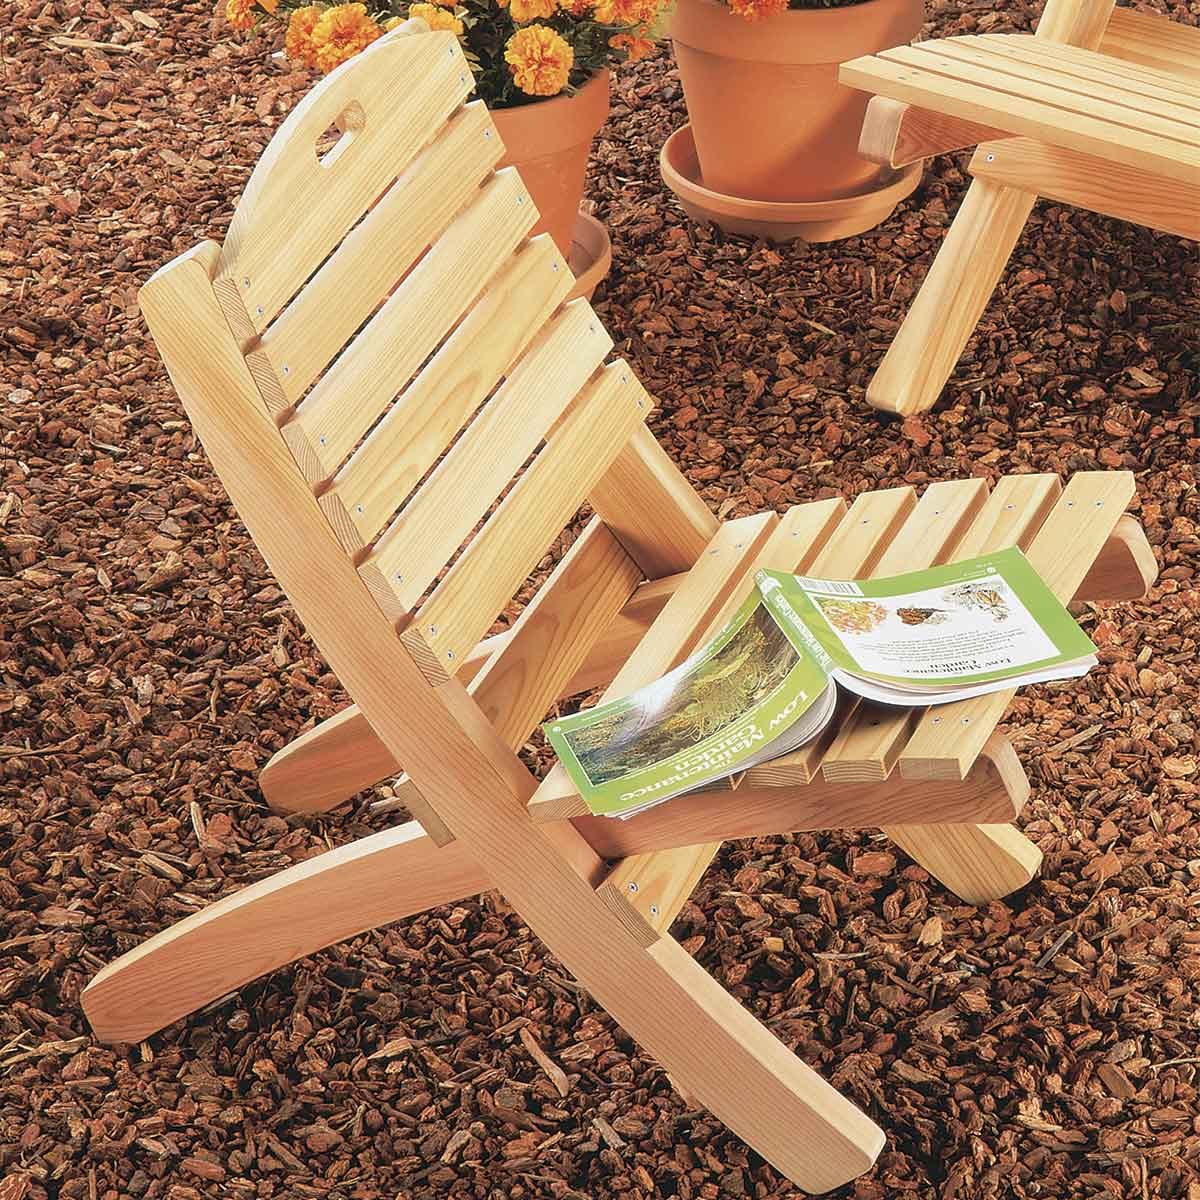 Simple Folding Chair: These projects will help you transform your space.